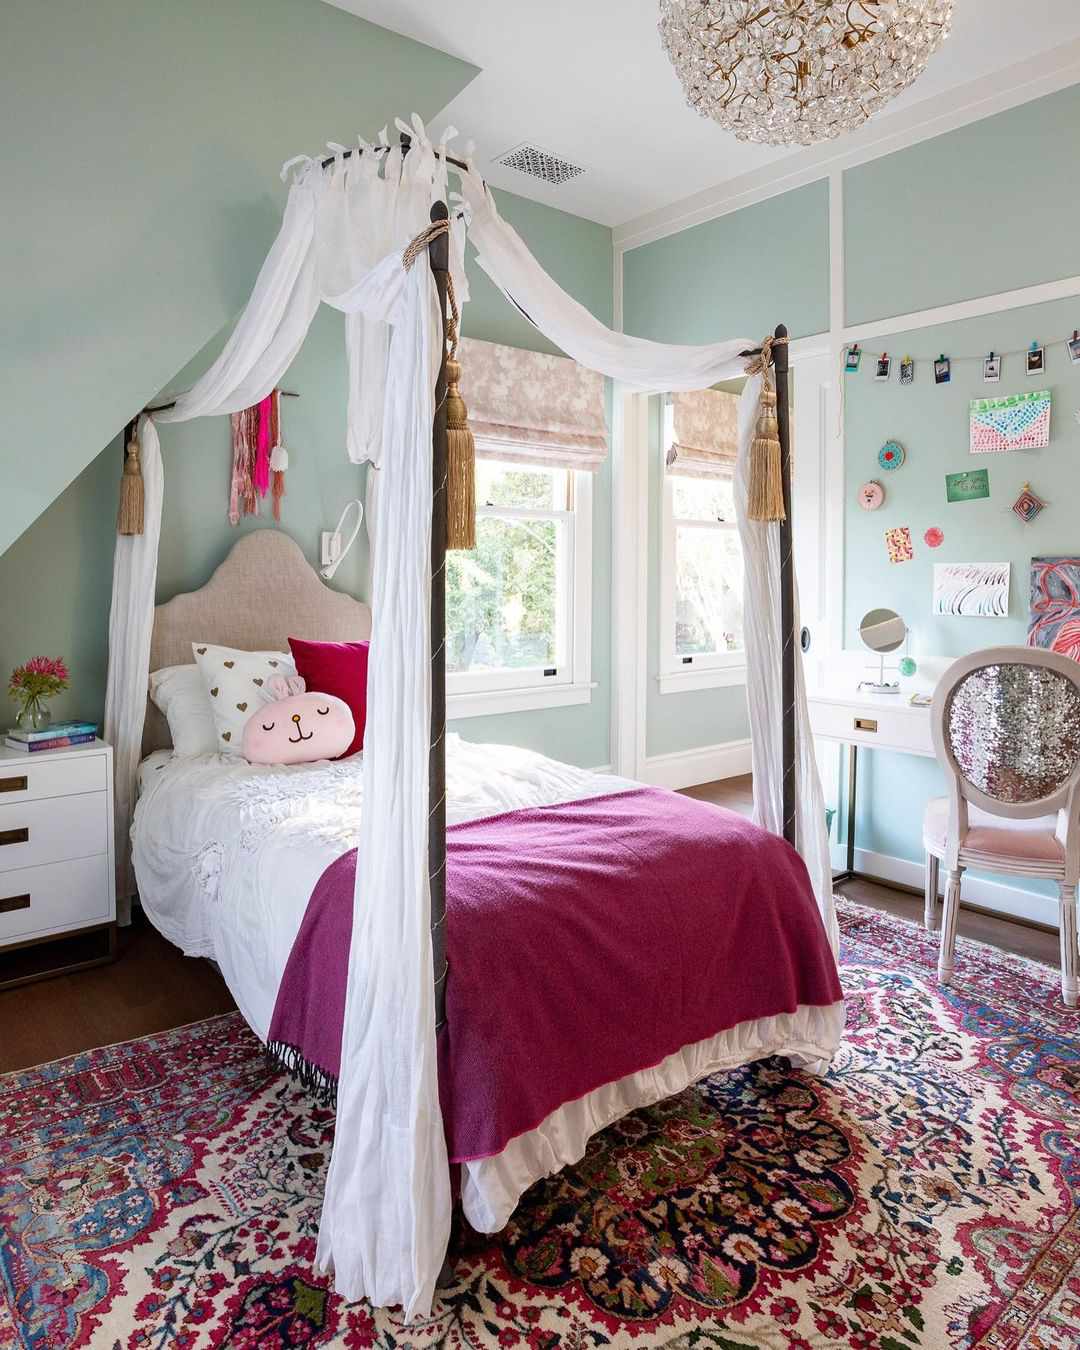 Mint green bedroom with fuschia accents.